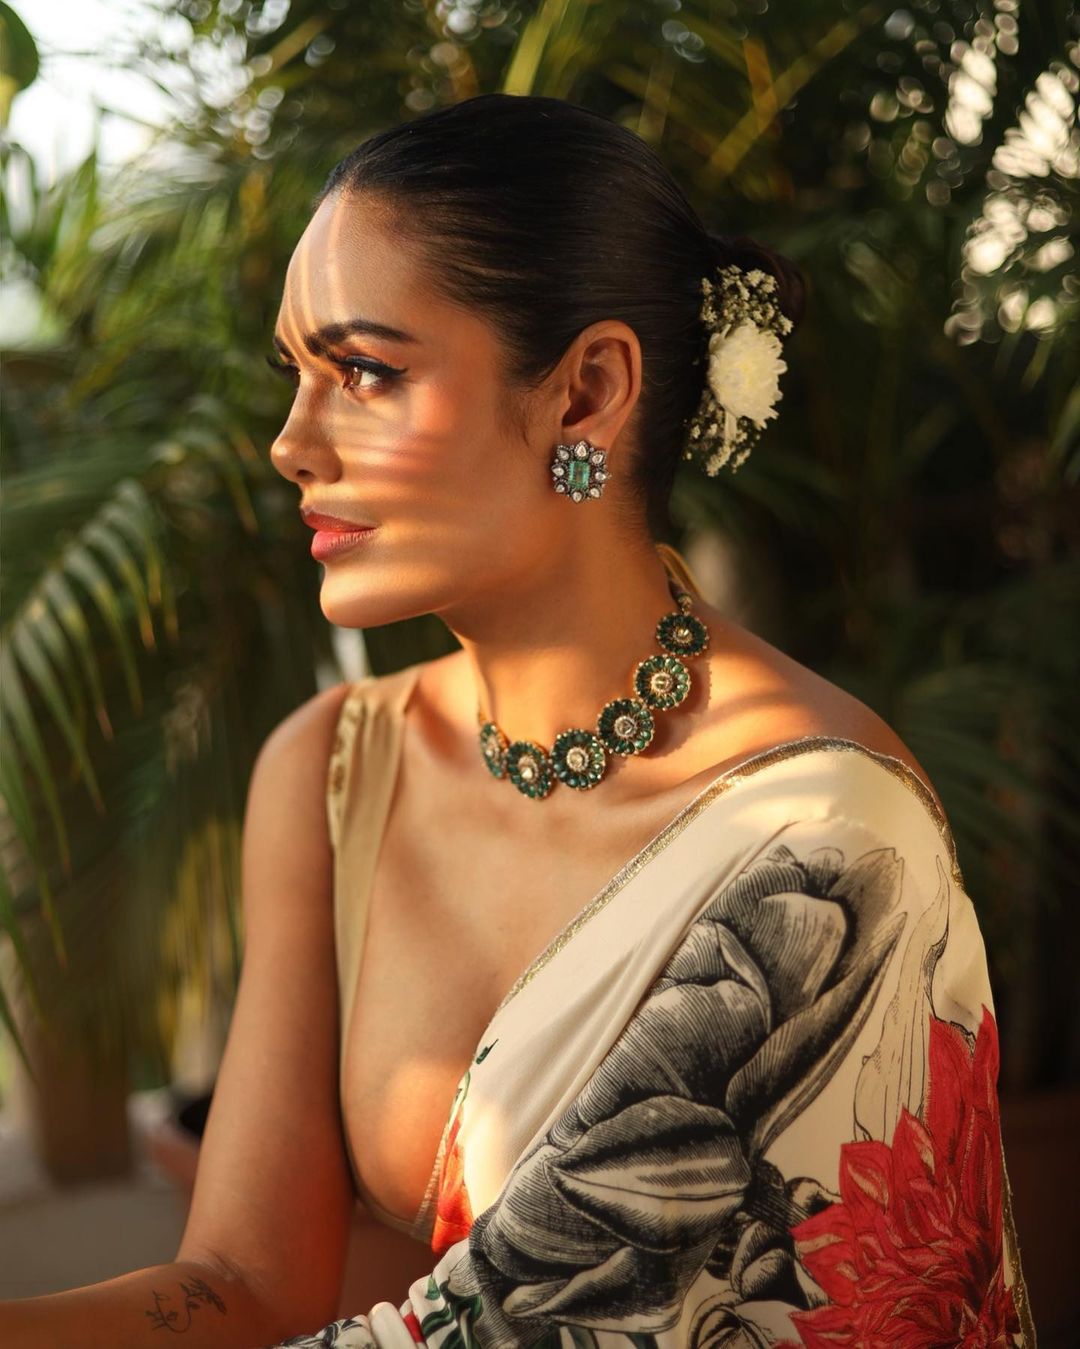 Esha Gupta looks glorious by pairing the saree with a bold blouse